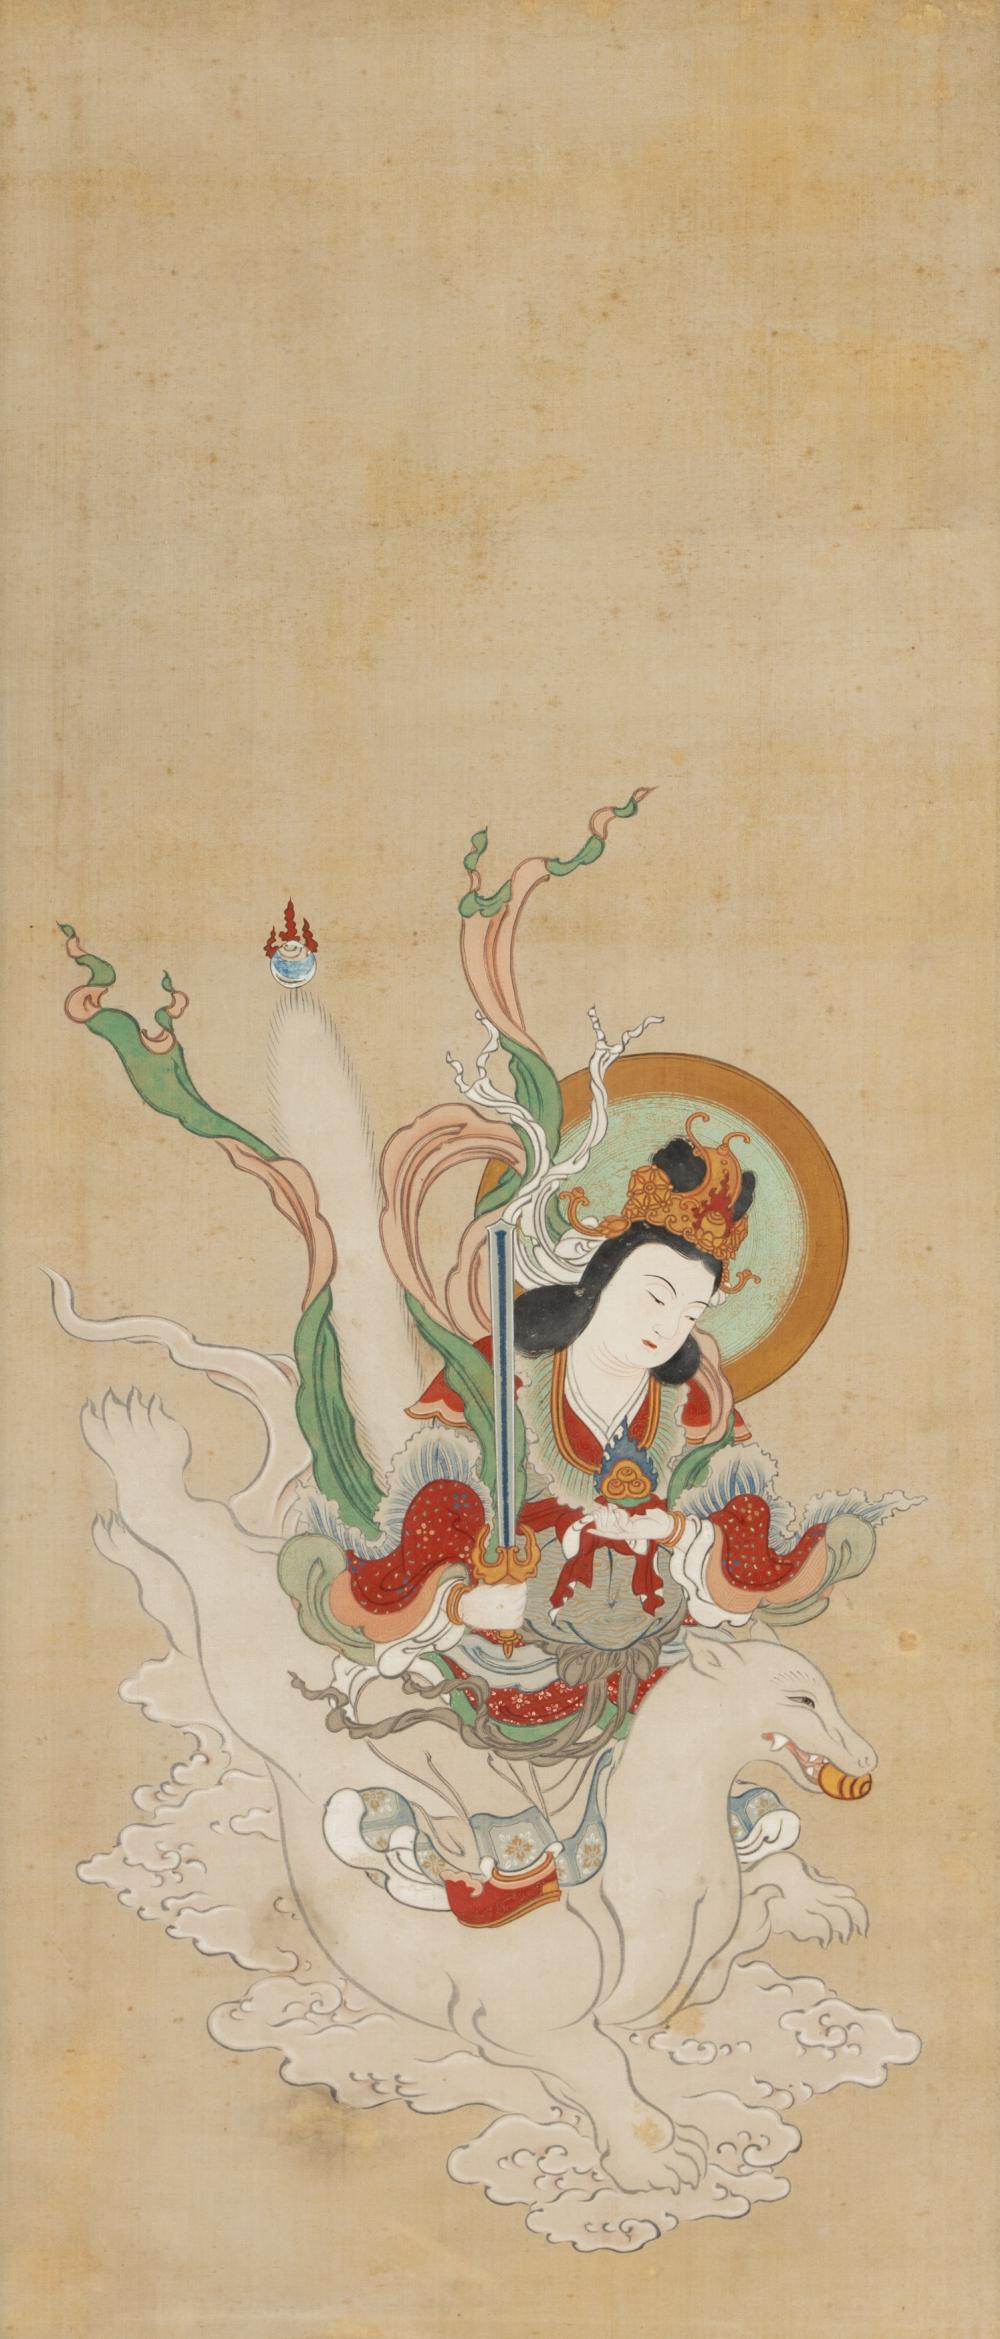 JAPANESE SCROLL PAINTING OF A DEITY 308f54